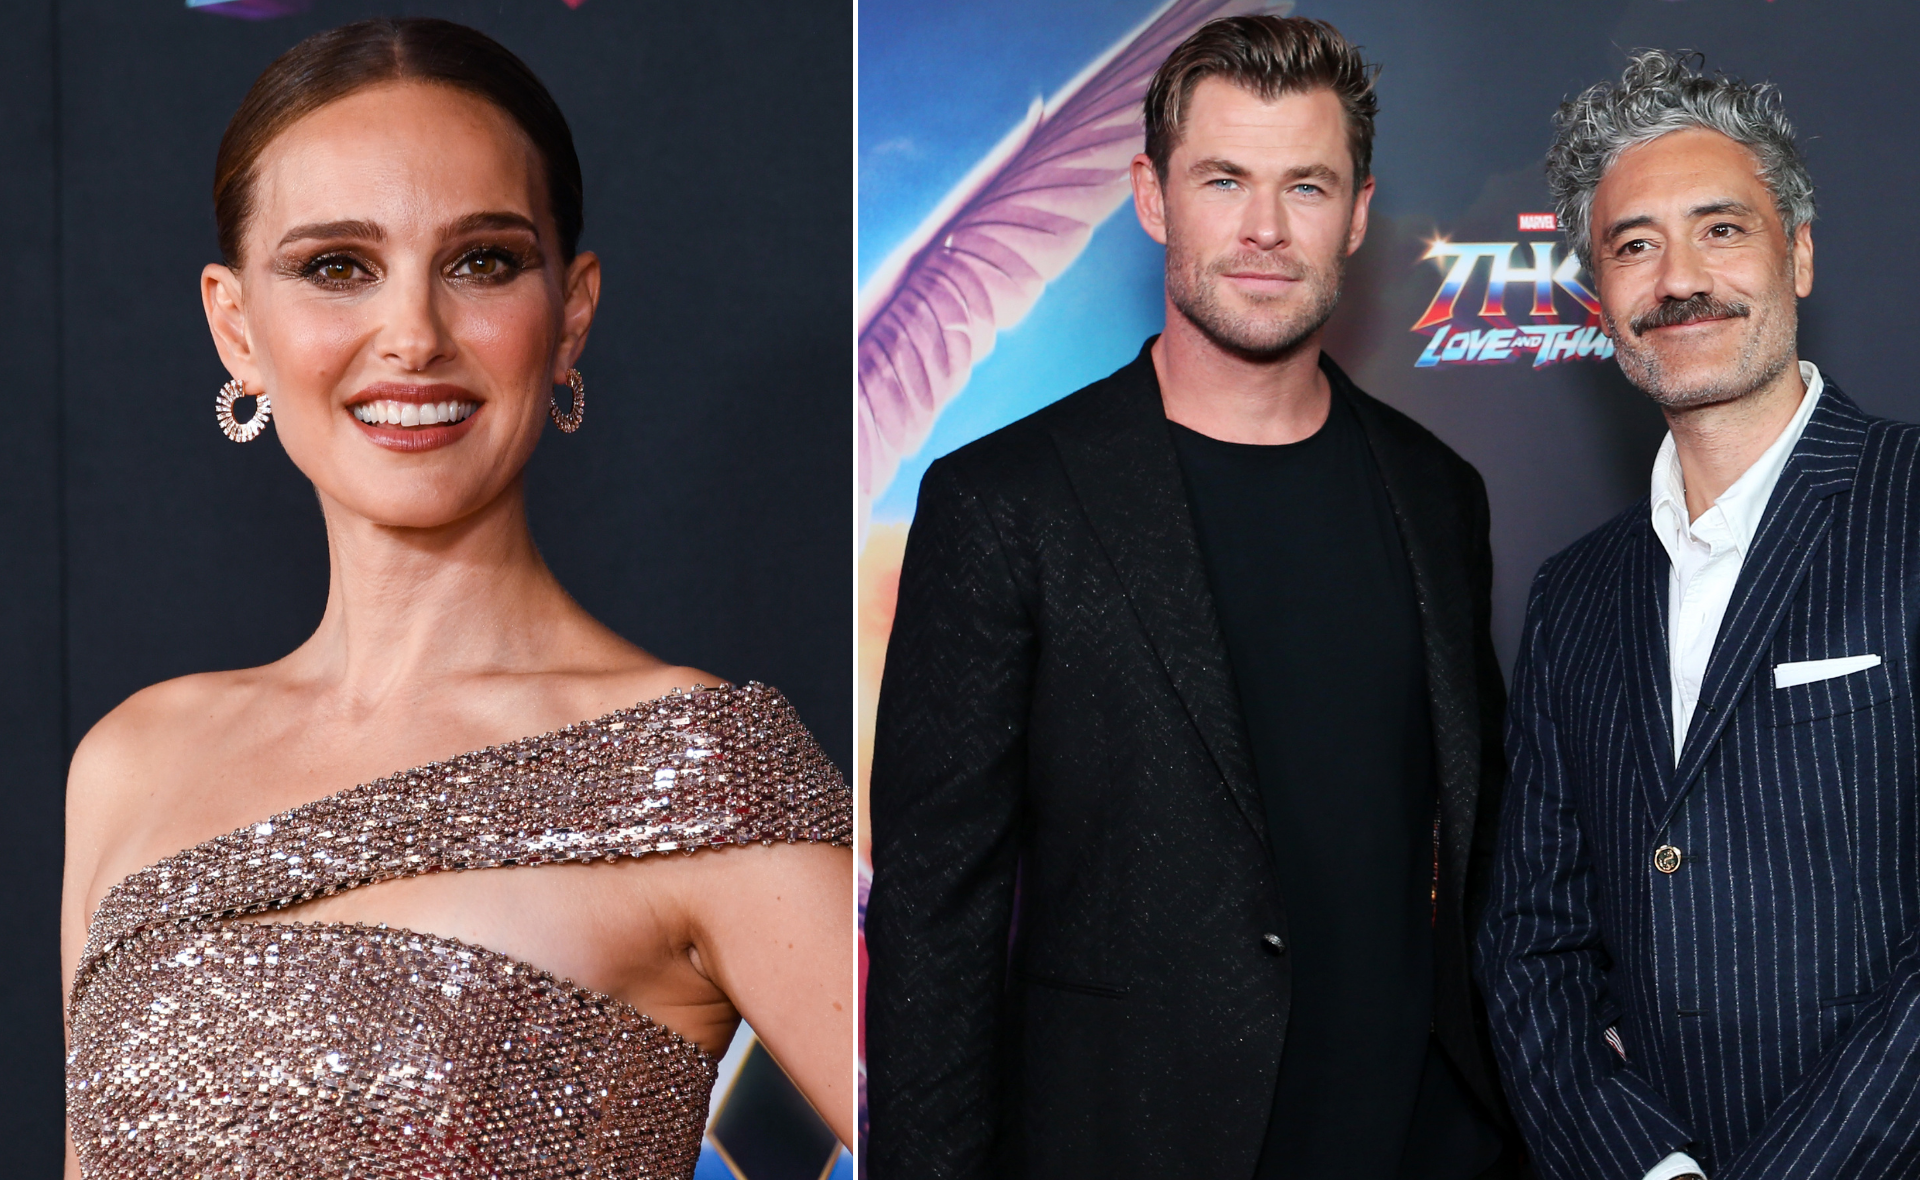 EXCLUSIVE: Thor: Love and Thunder stars Chris Hemsworth and Natalie Portman are “thankful” they worked with Taika Waititi